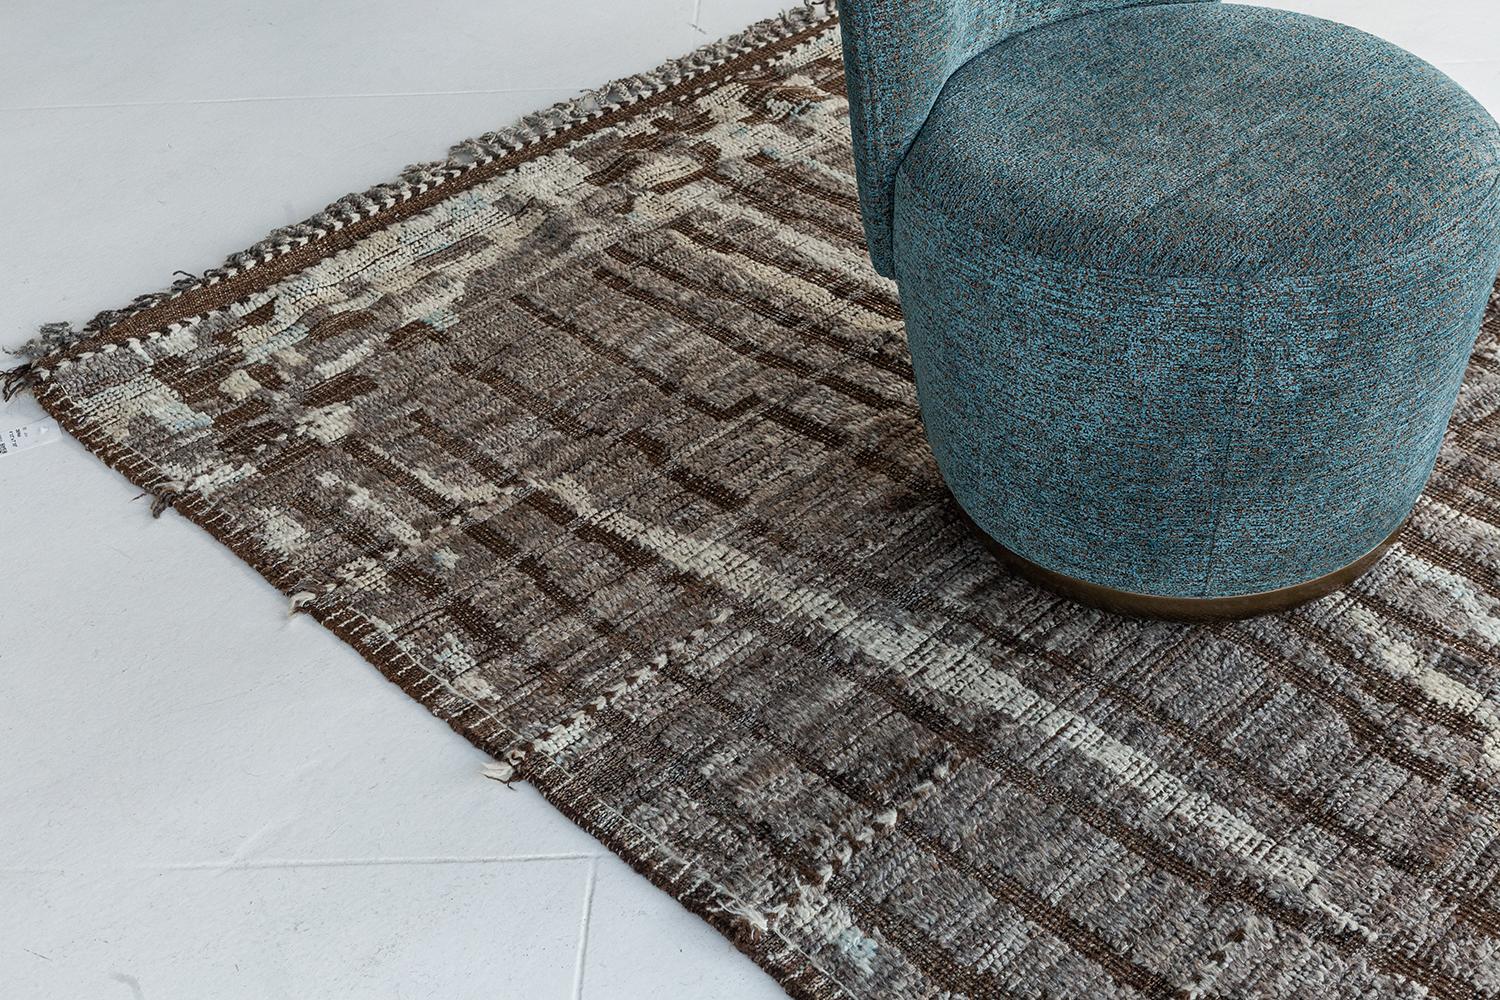 Berberis is an interplay between darker neutral tones and soothing muted colours into a modern day interpretation of the Moroccan world. This rug's play of textures, linework, and unique shapes is what makes the Atlas Collection so unique and sought